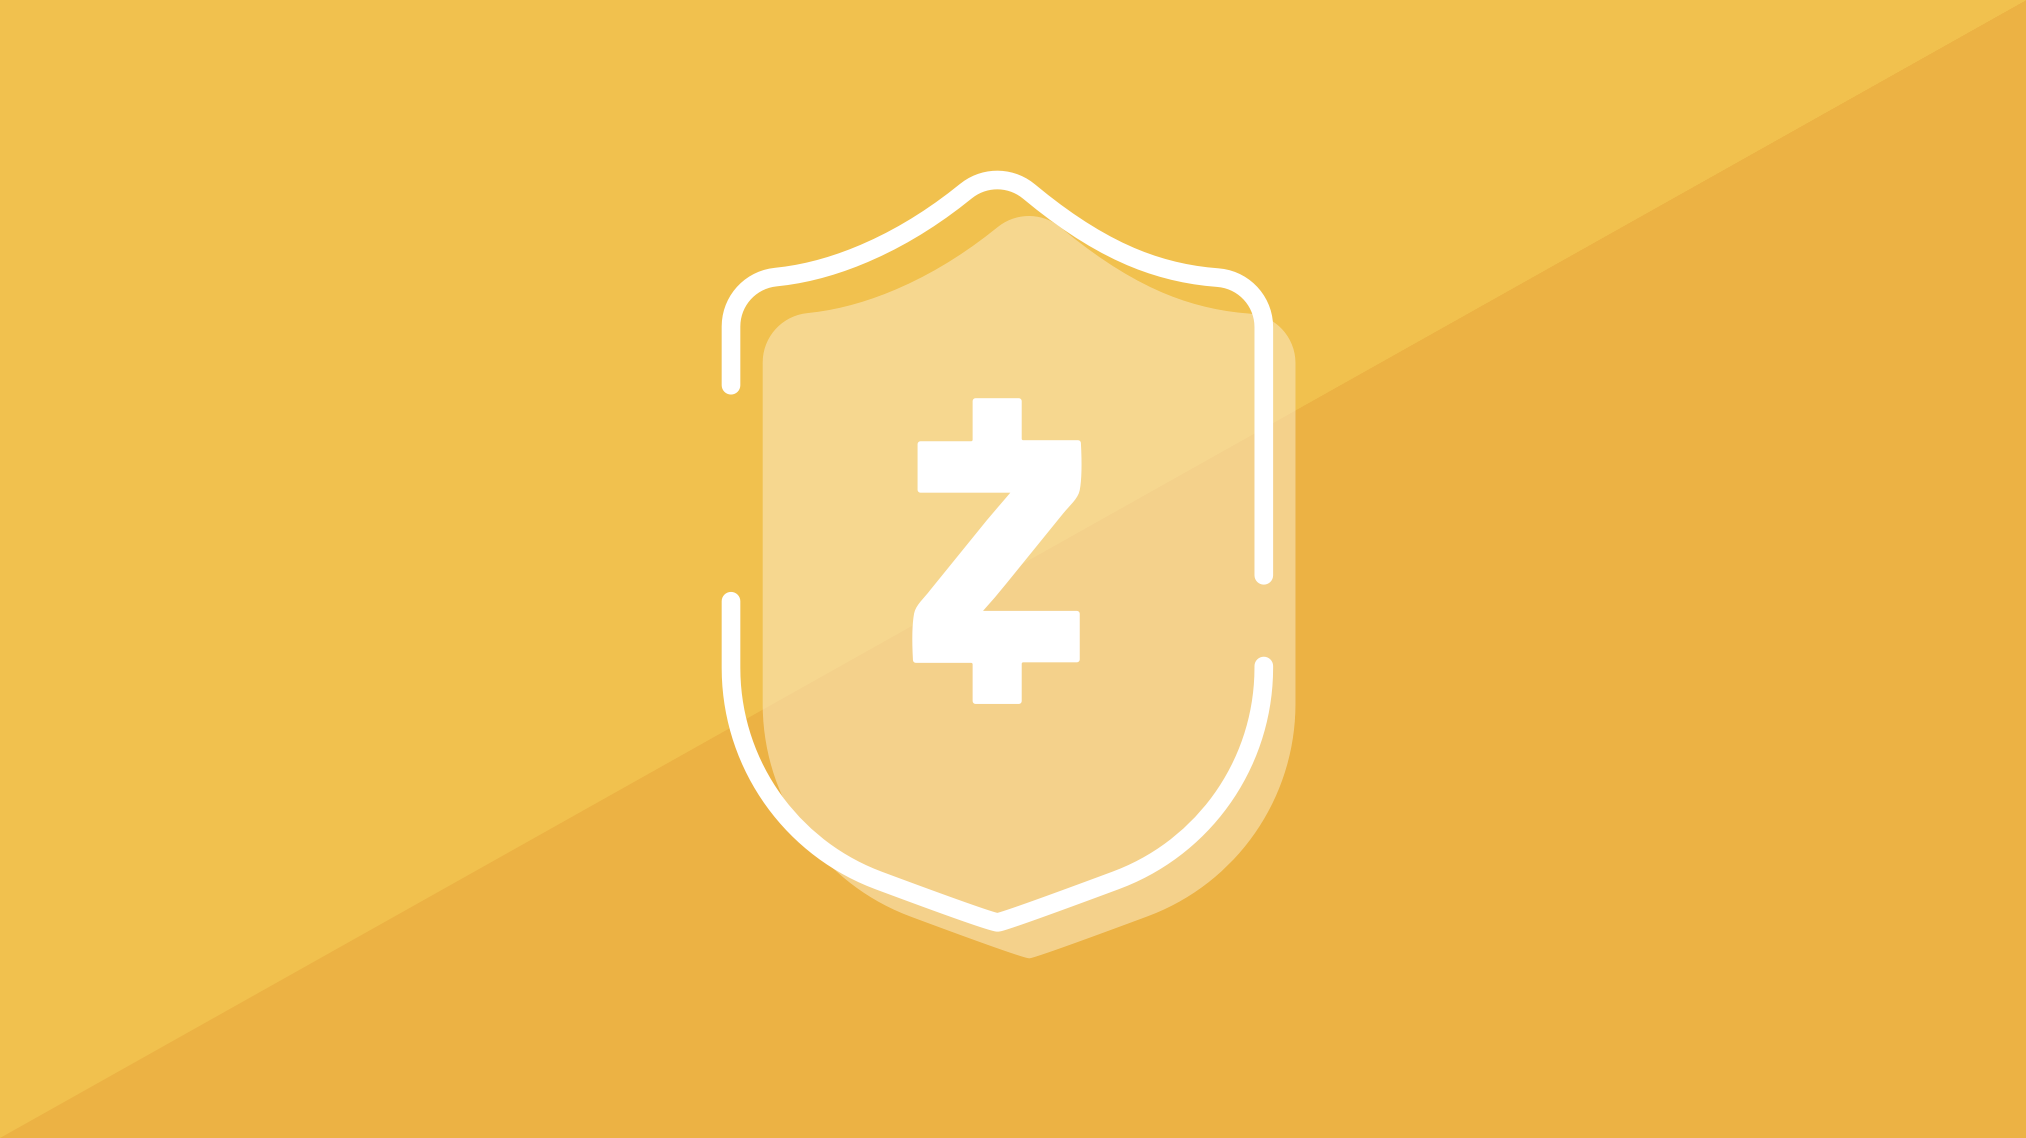 Zcash (ZEC) Price - Buy, Sell & View The Price Of Zcash Crypto 